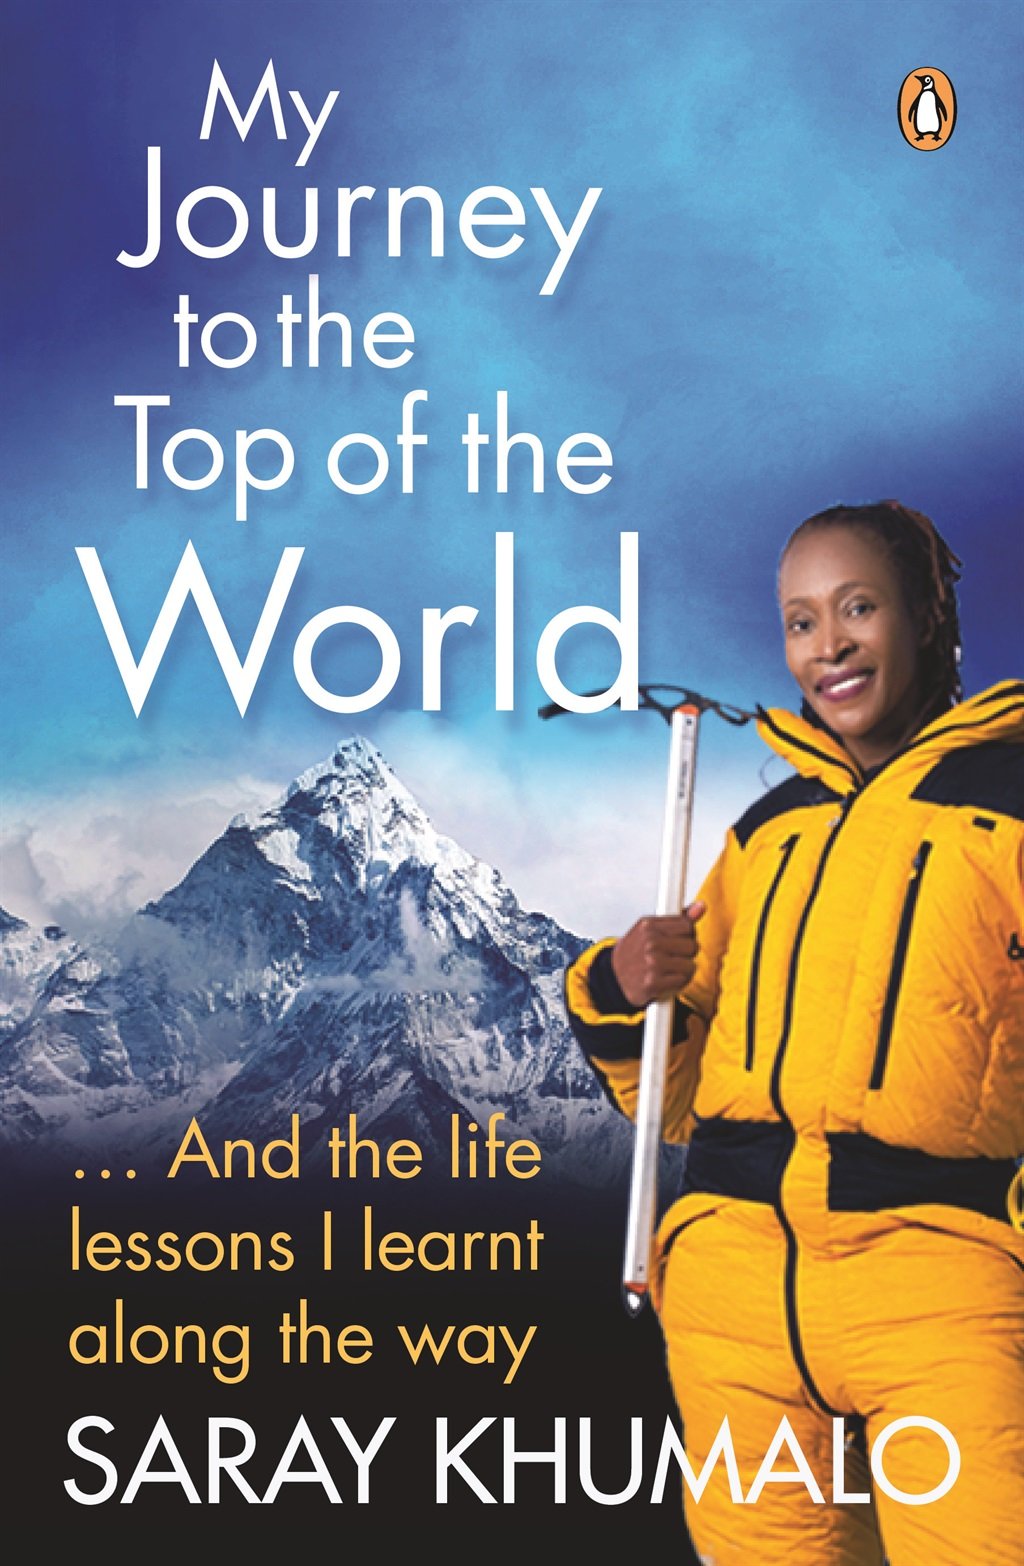 EXCERPT | 'My journey to the top of the world': Death on the mountain ...